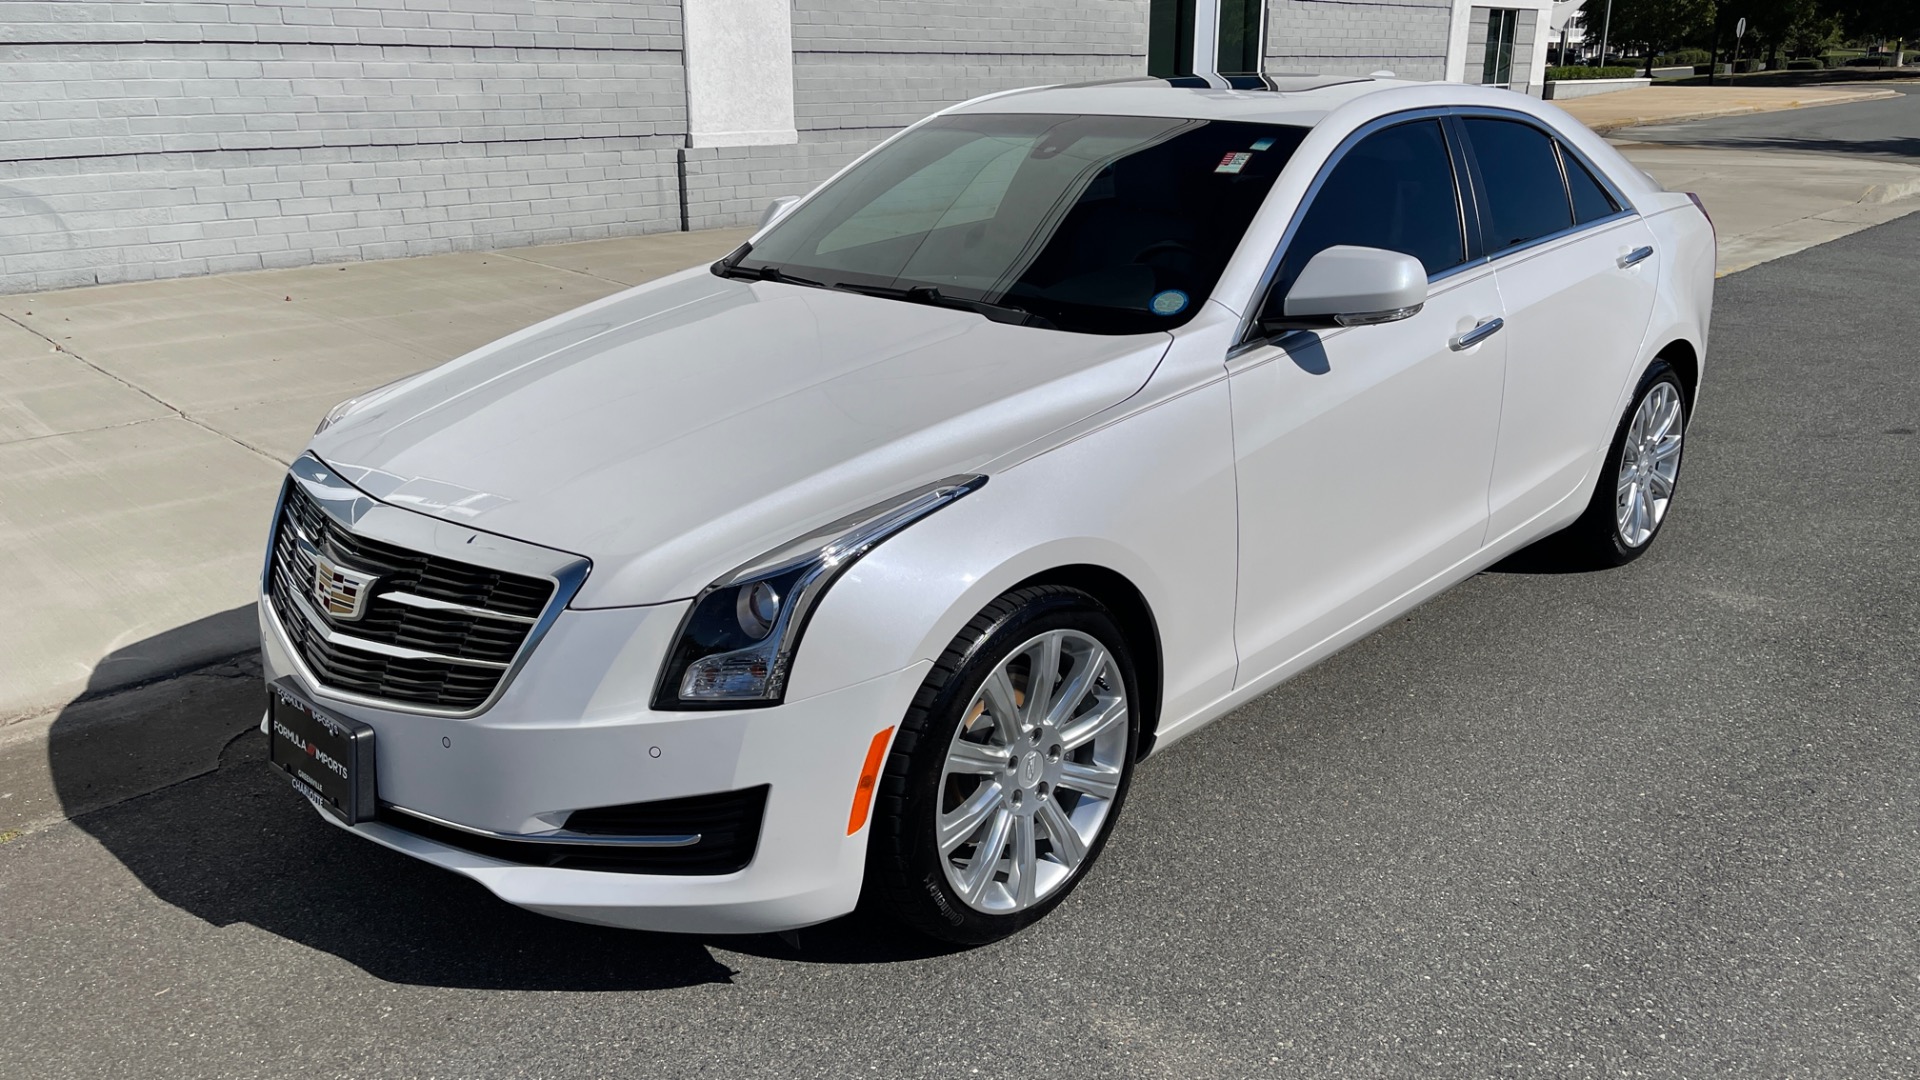 Used 2017 Cadillac ATS Sedan Luxury AWD / SUNROOF / REMOTE START / HEATED SEATS / LEATHER for sale Sold at Formula Imports in Charlotte NC 28227 5